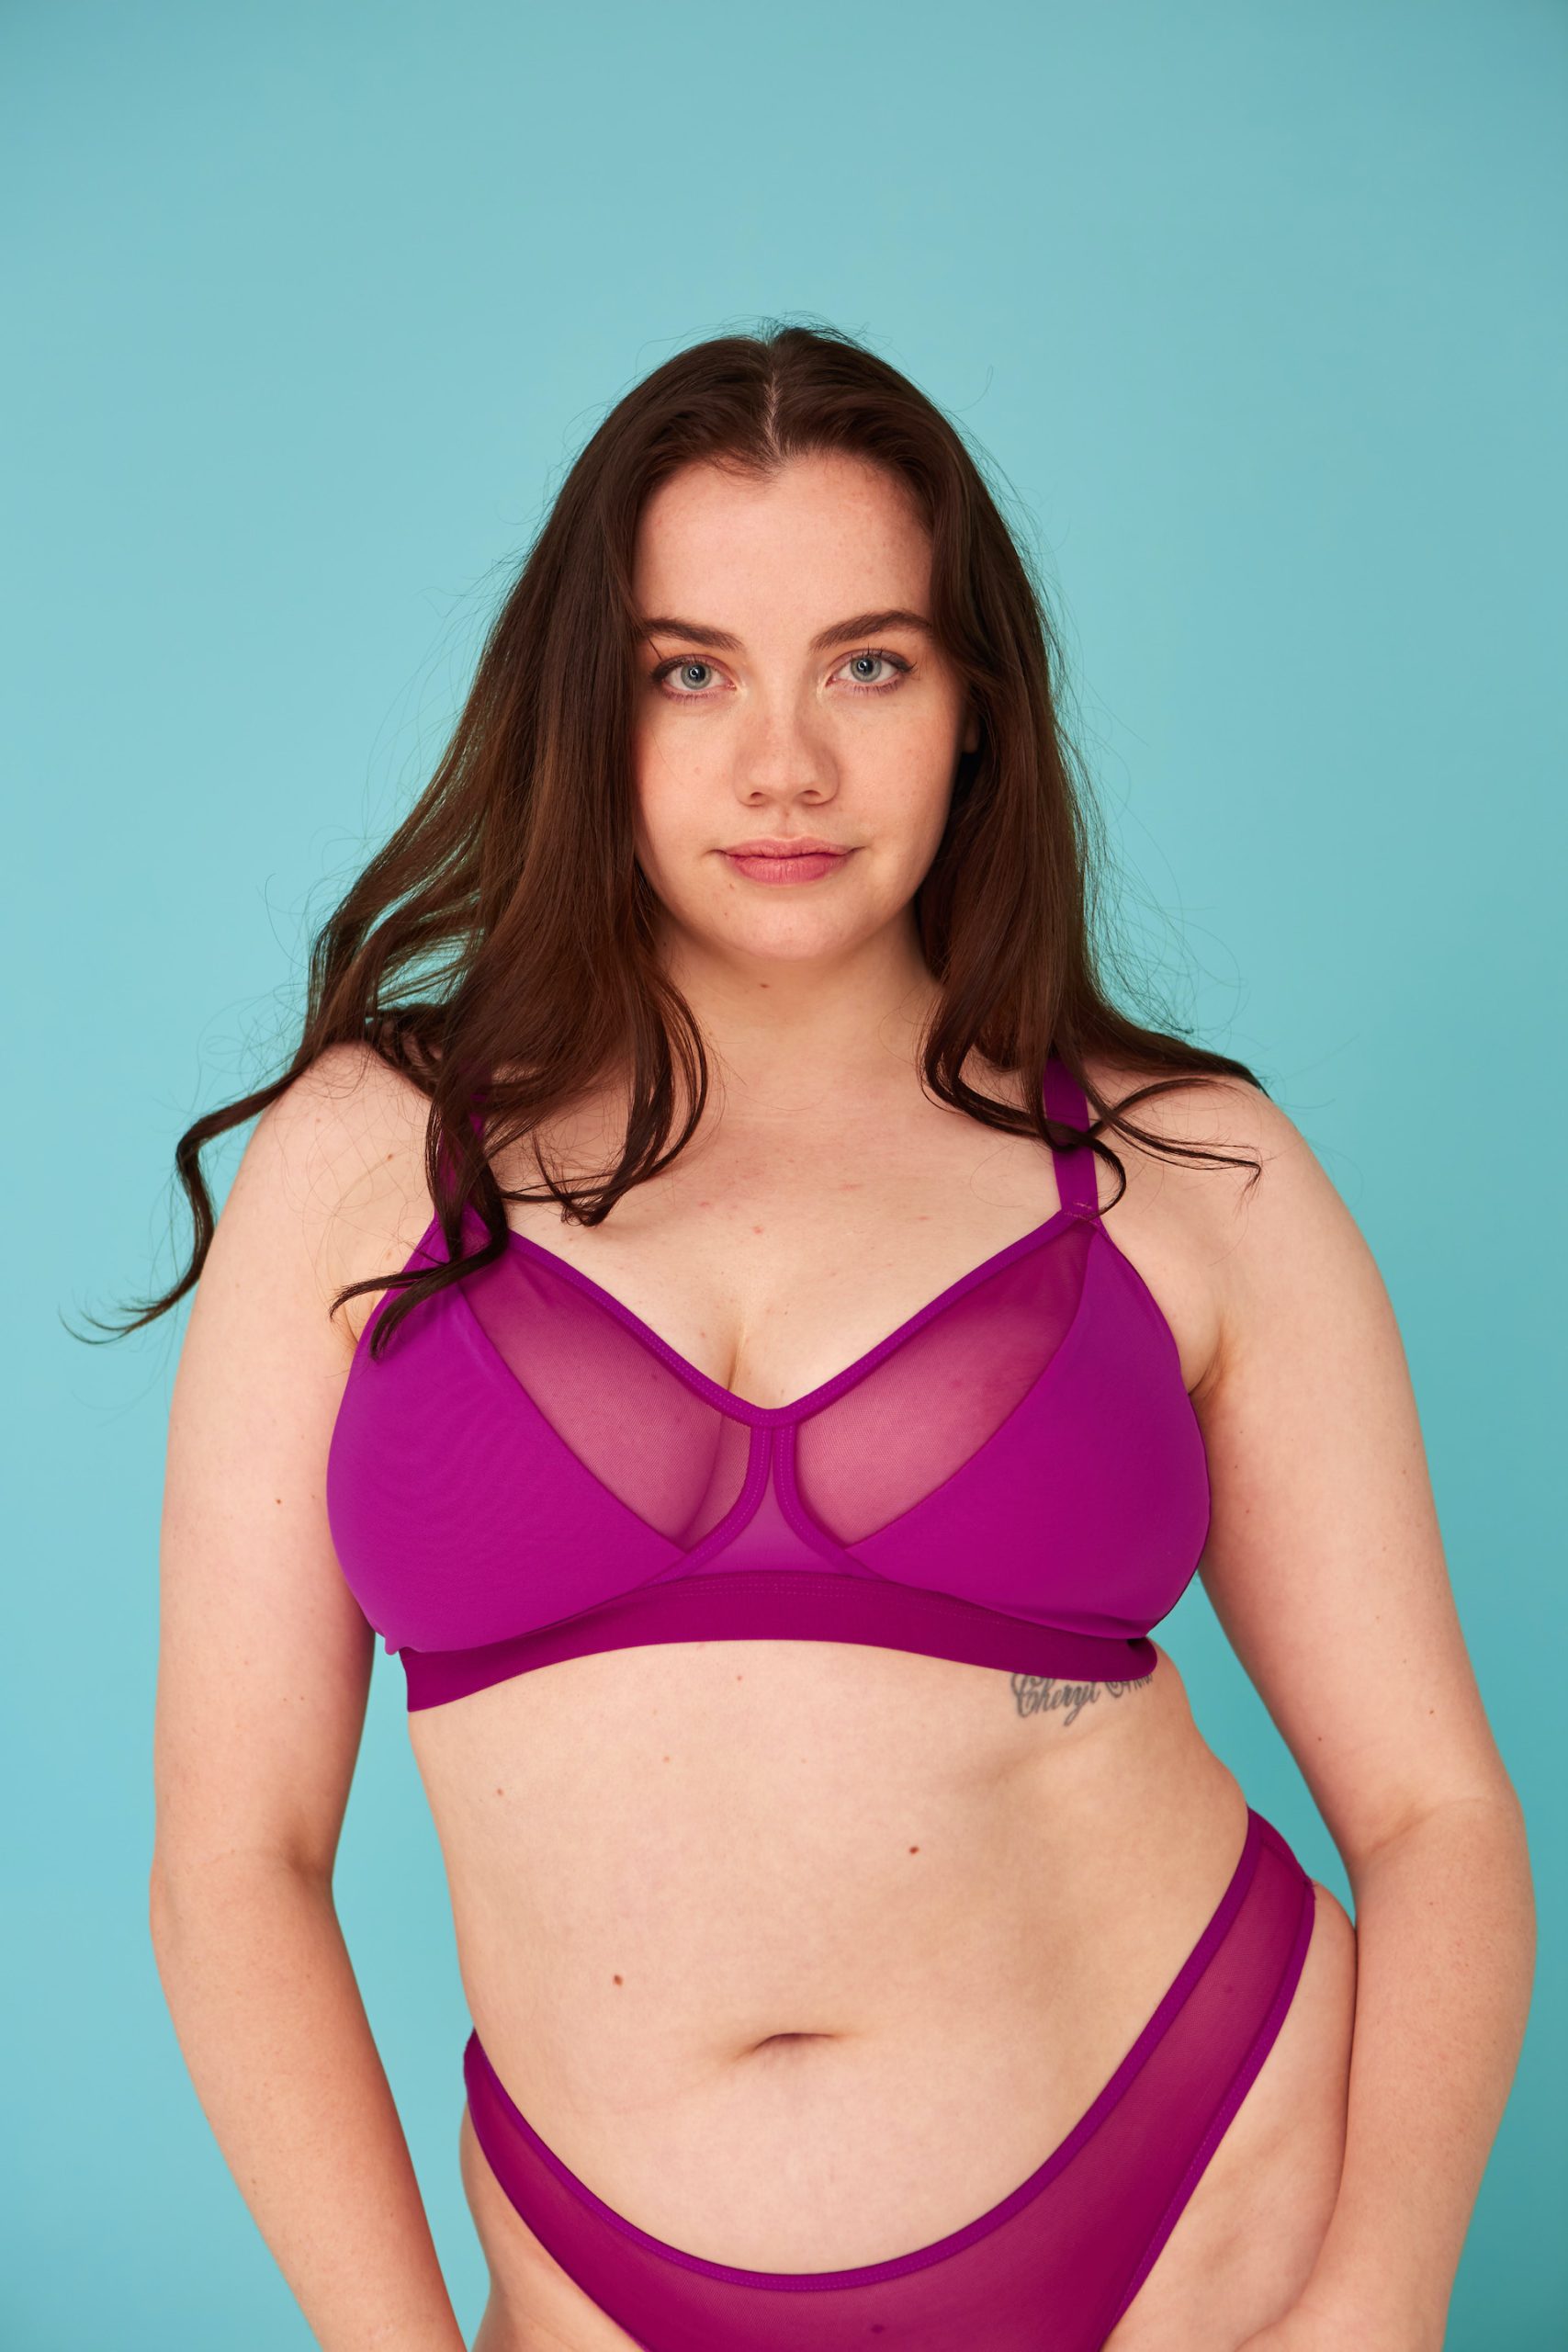 Woman wearing the Ava Bra sewing pattern from The New Craft House on The Fold Line. A bra pattern made in stretch mesh, cotton jersey, lingerie jersey and lace fabrics, featuring a soft cup triangular bra, under band, adjustable slider shoulder straps, adjustable hook and eye back clasp.